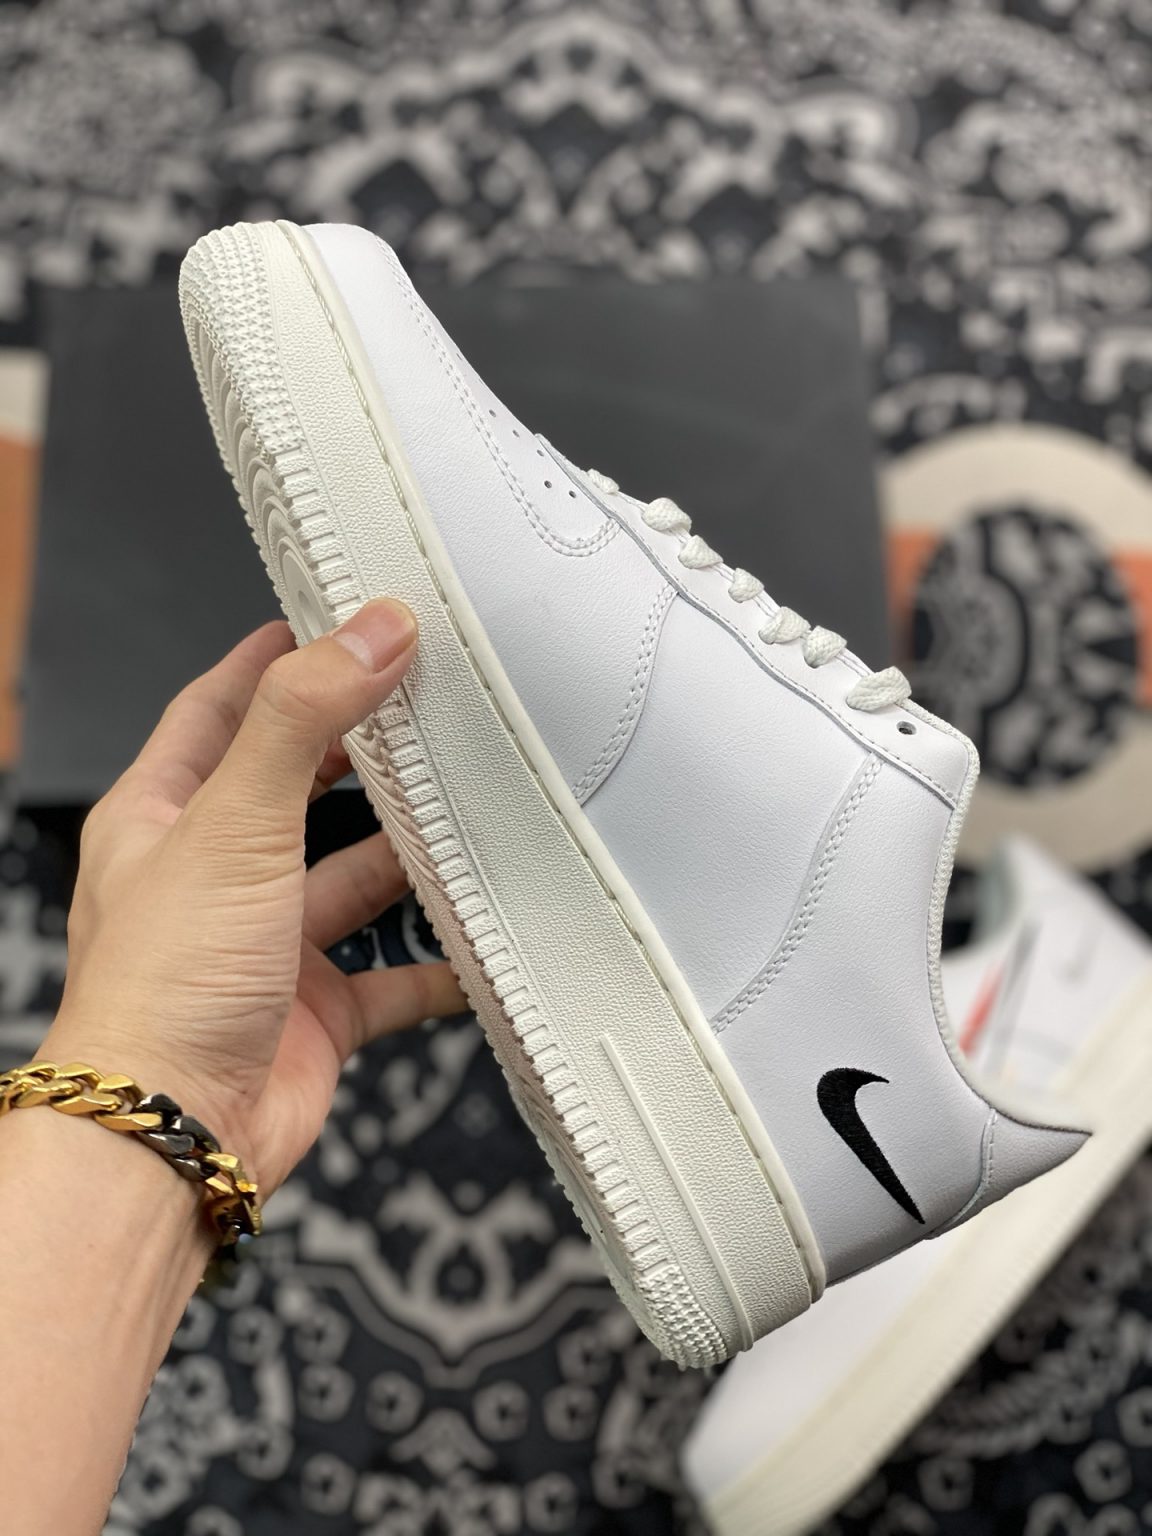 Nike Air Force 1 Low MultiSwoosh White DM9096-100 For Sale – Sneaker Hello